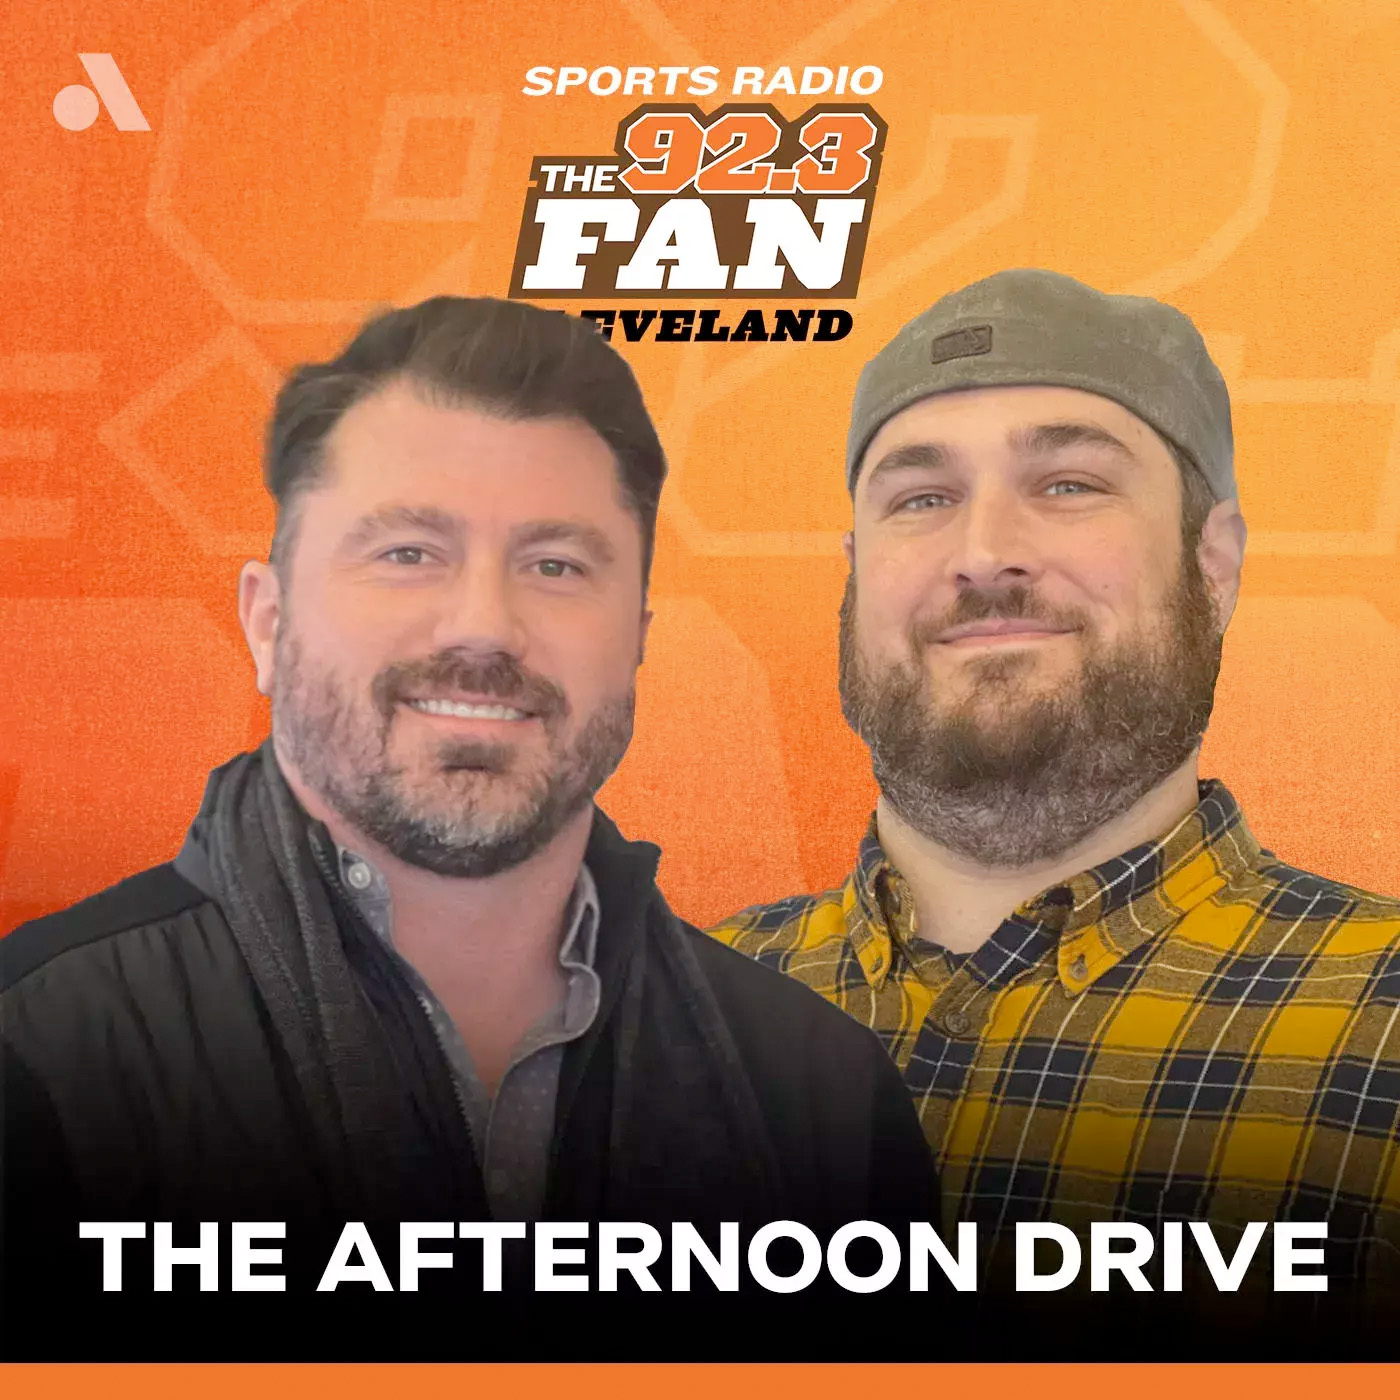 Andy Baskin and Dustin Fox recap Cavs' loss, disappointing end to the season